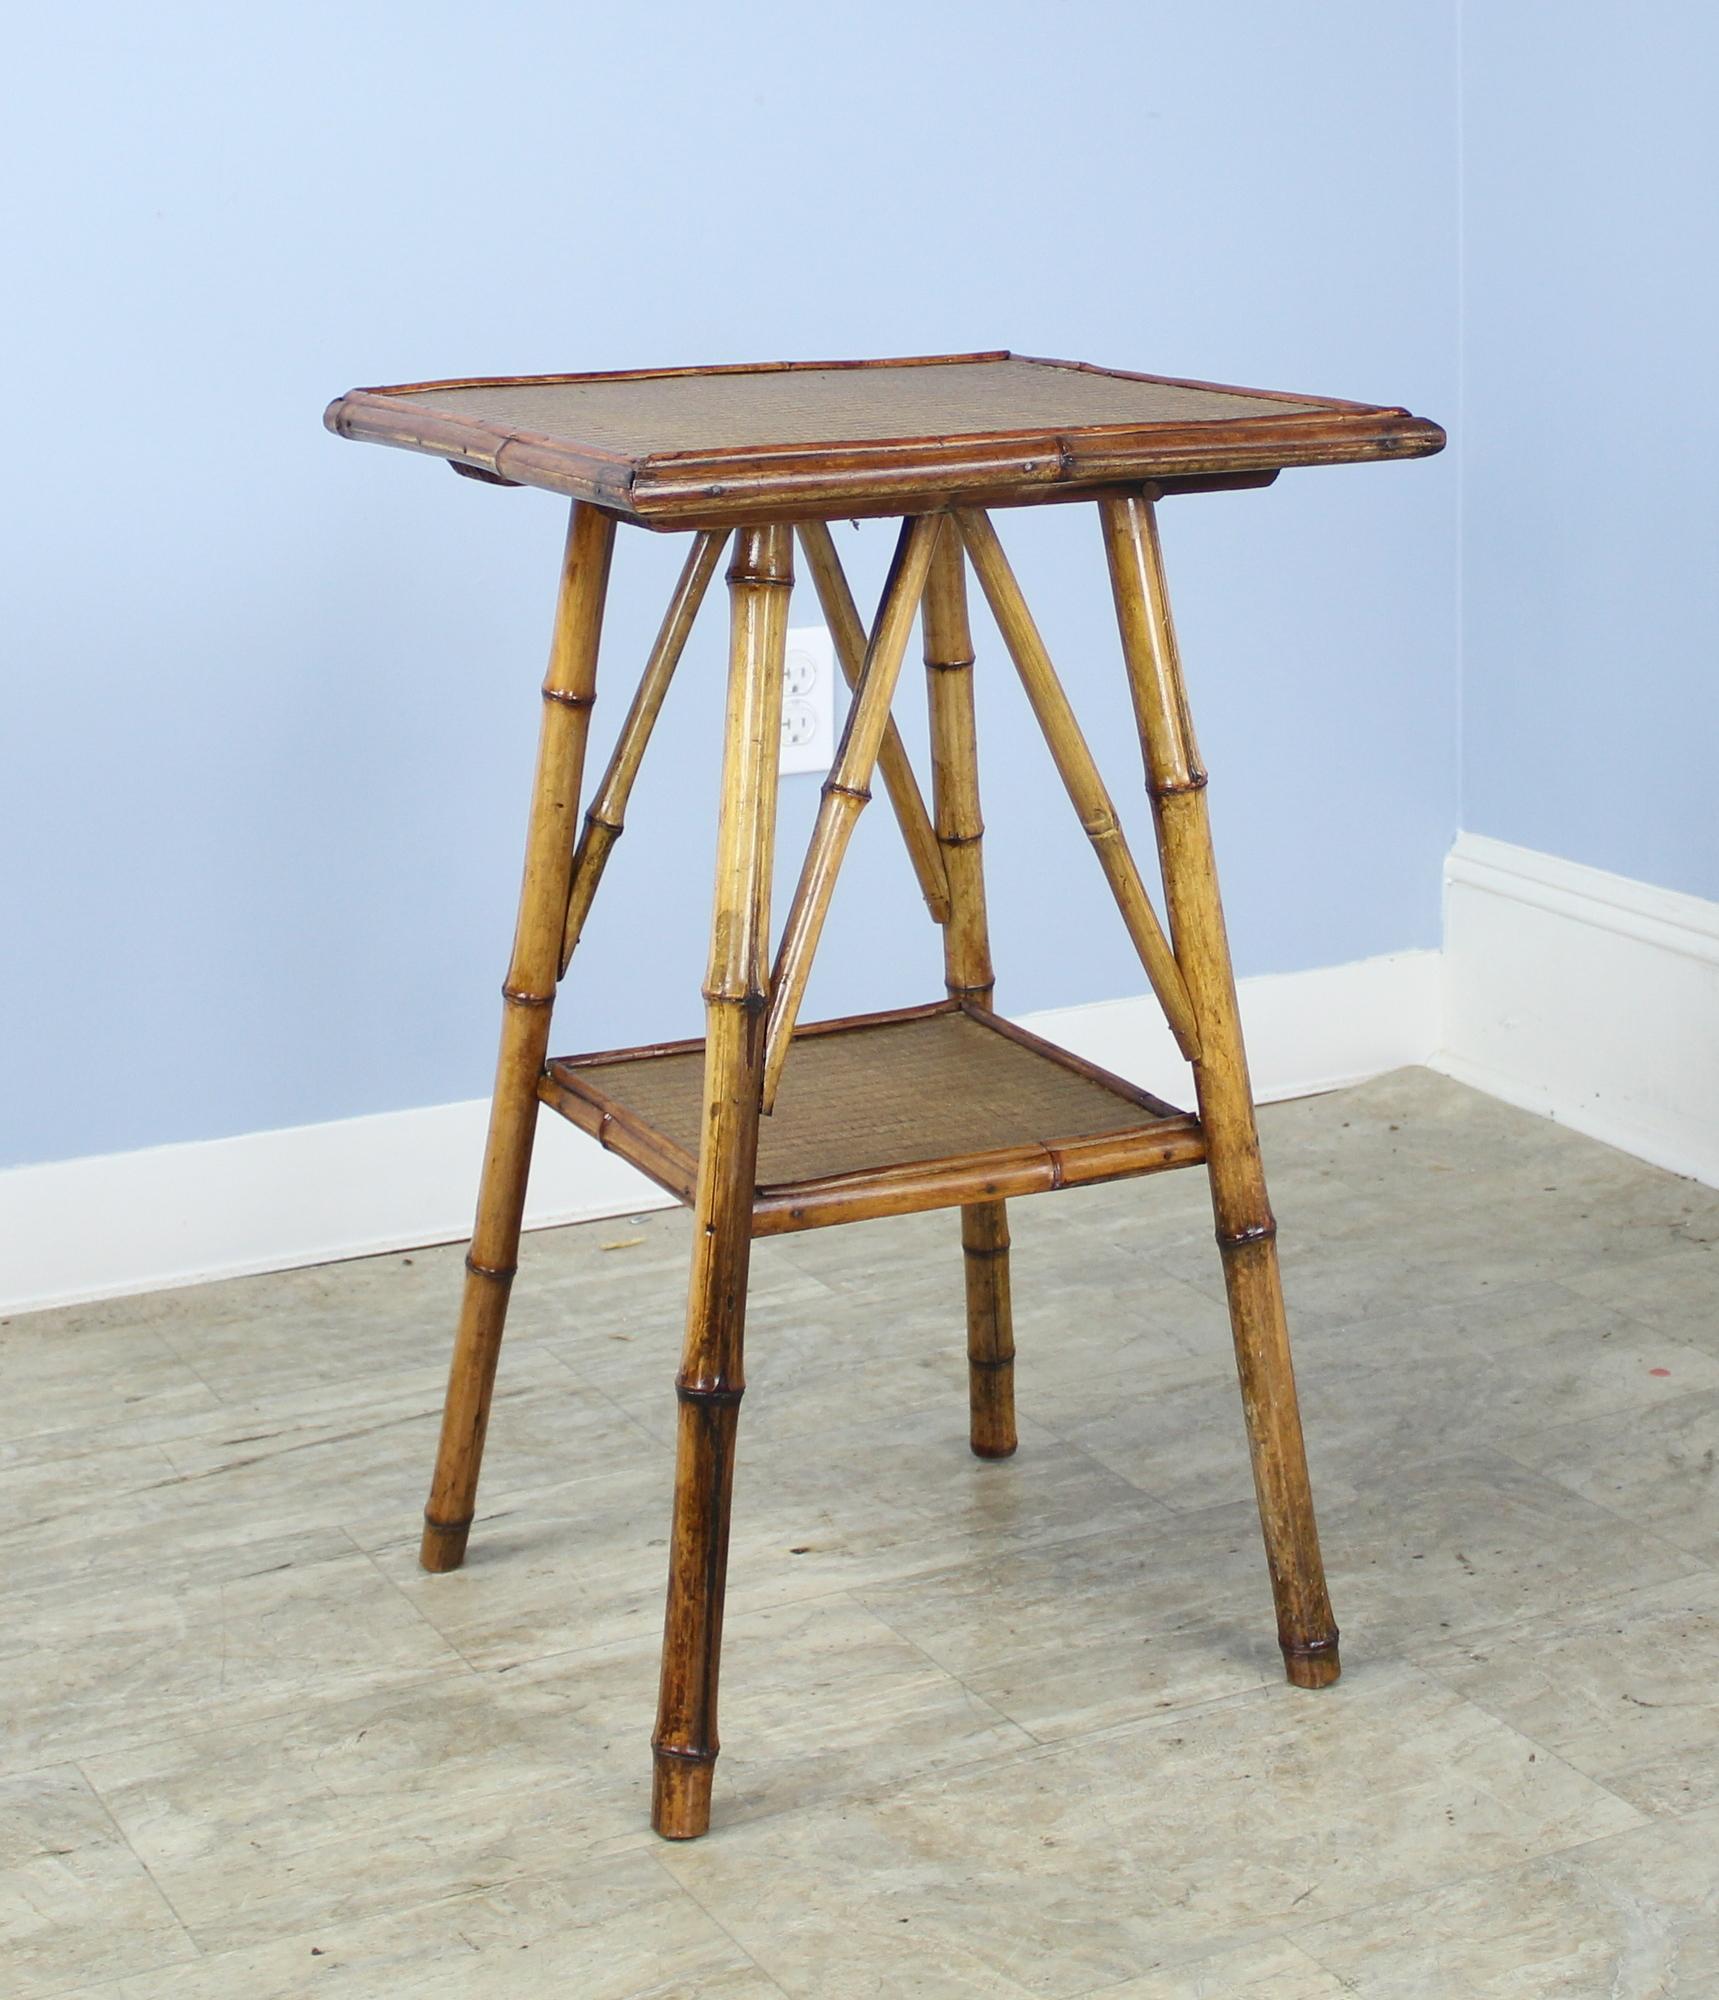 An antique English bamboo side table, with flared legs and with two shelves. Both shelves are made of tightly woven rattan that is in very good condition. The bamboo, vividly colored, is in good sturdy condition. Charming as an end or lamp table.